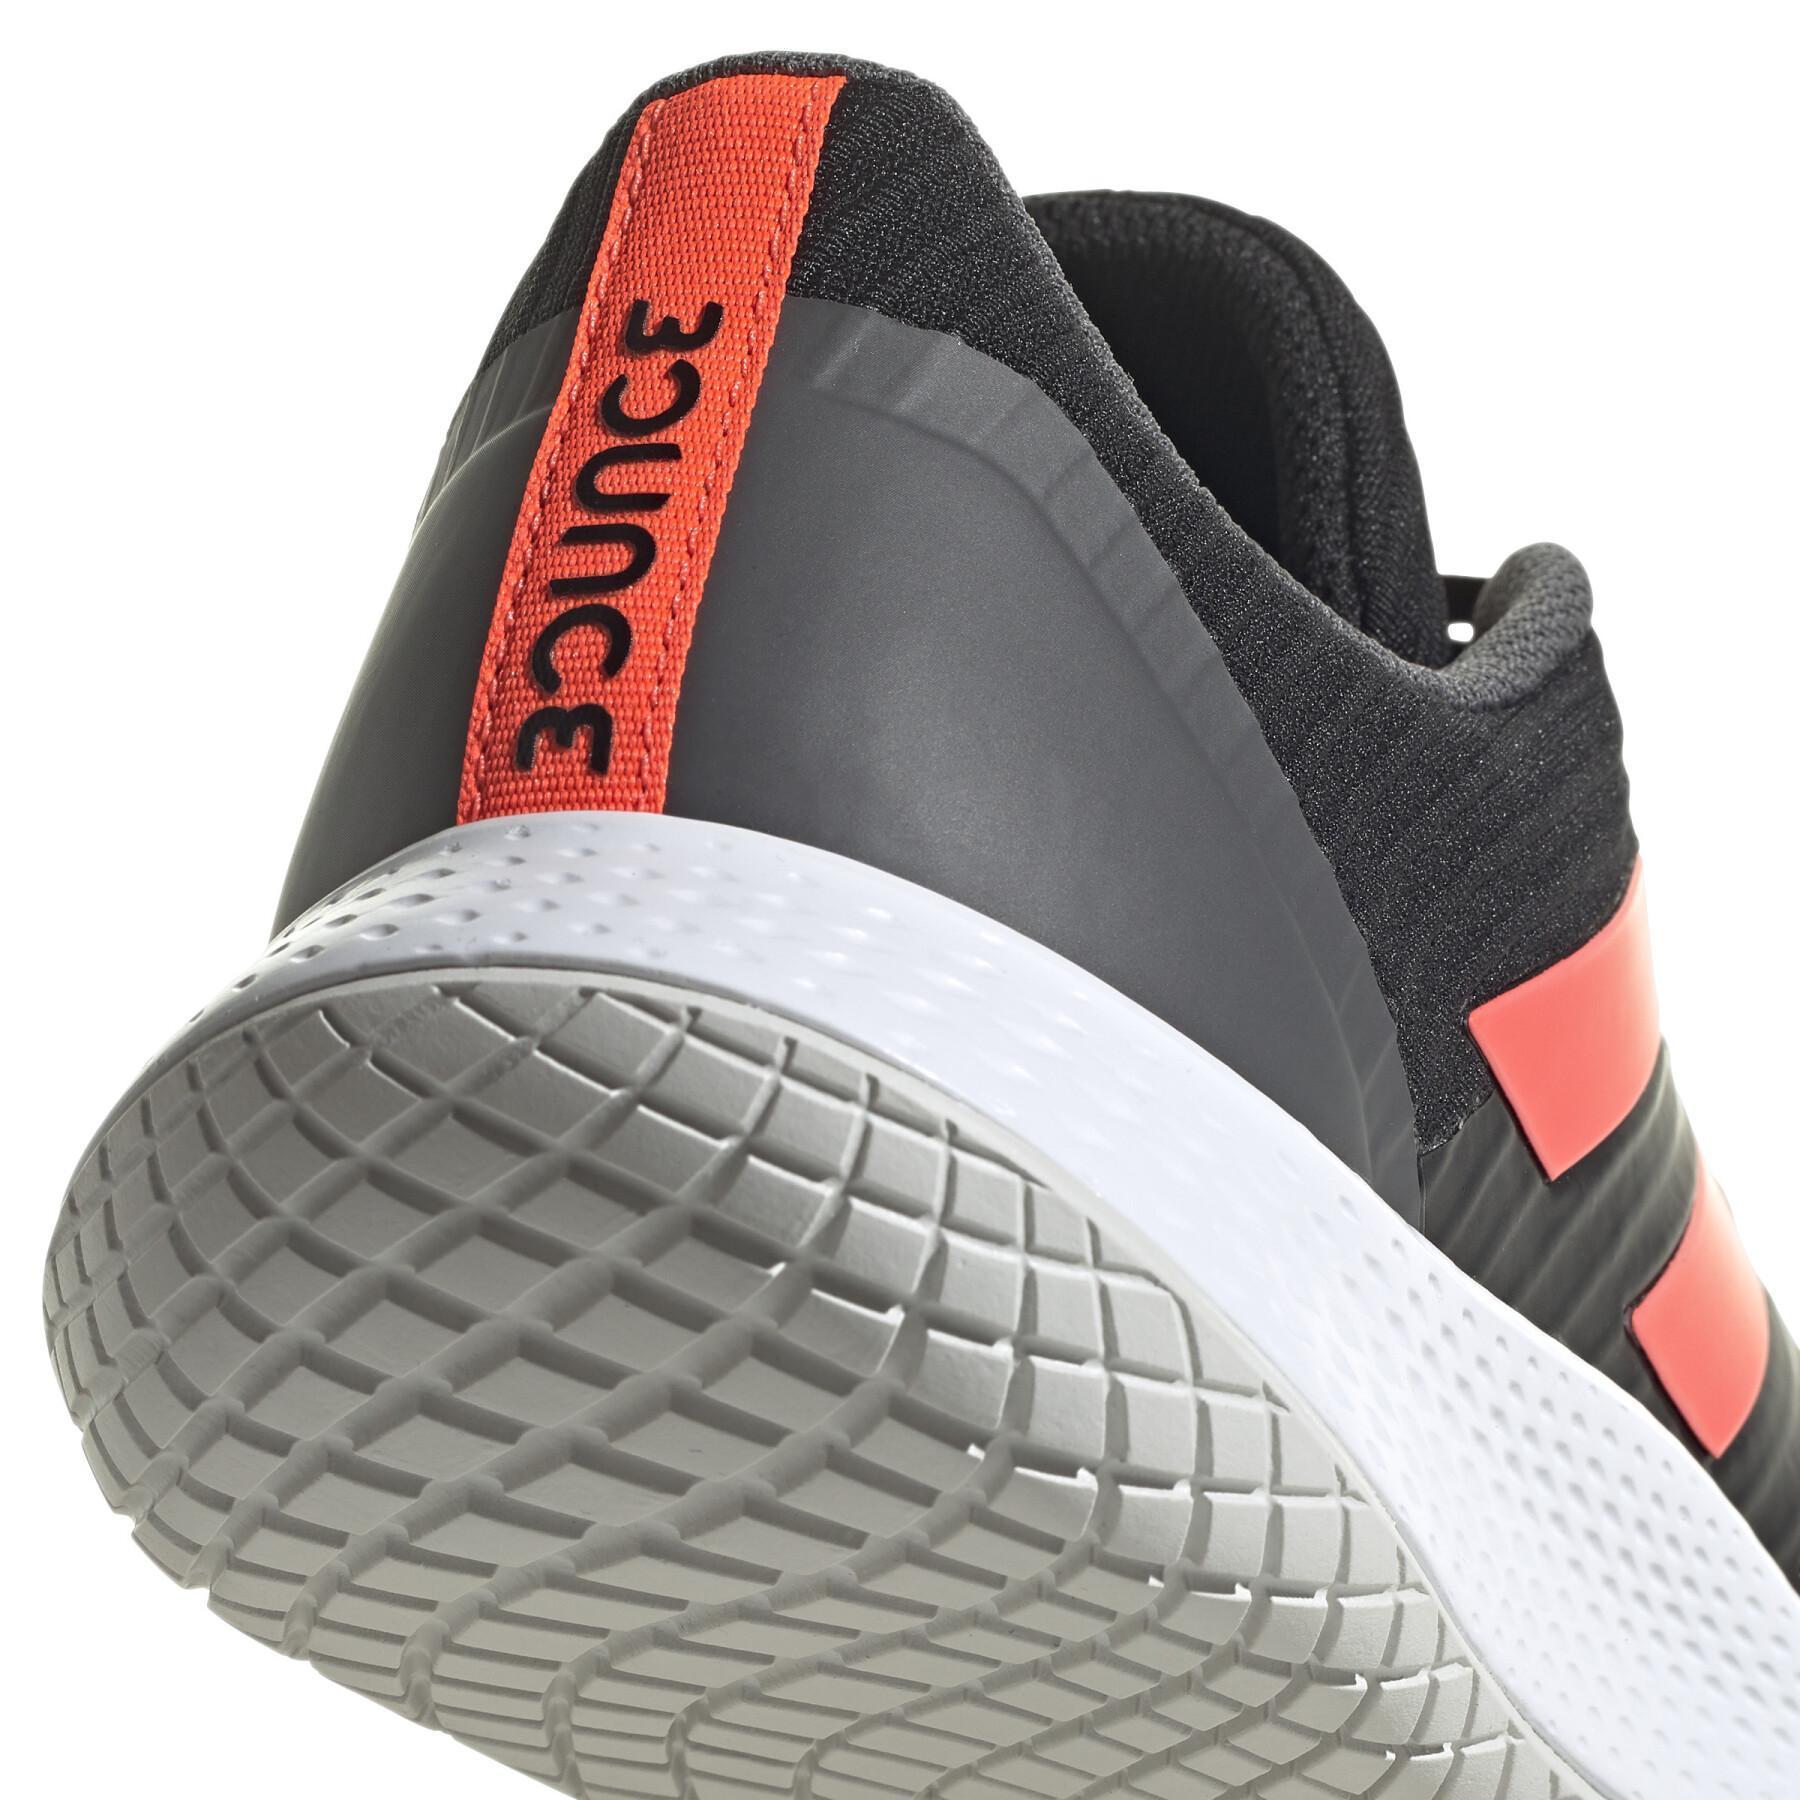 Chaussures adidas Force Bounce